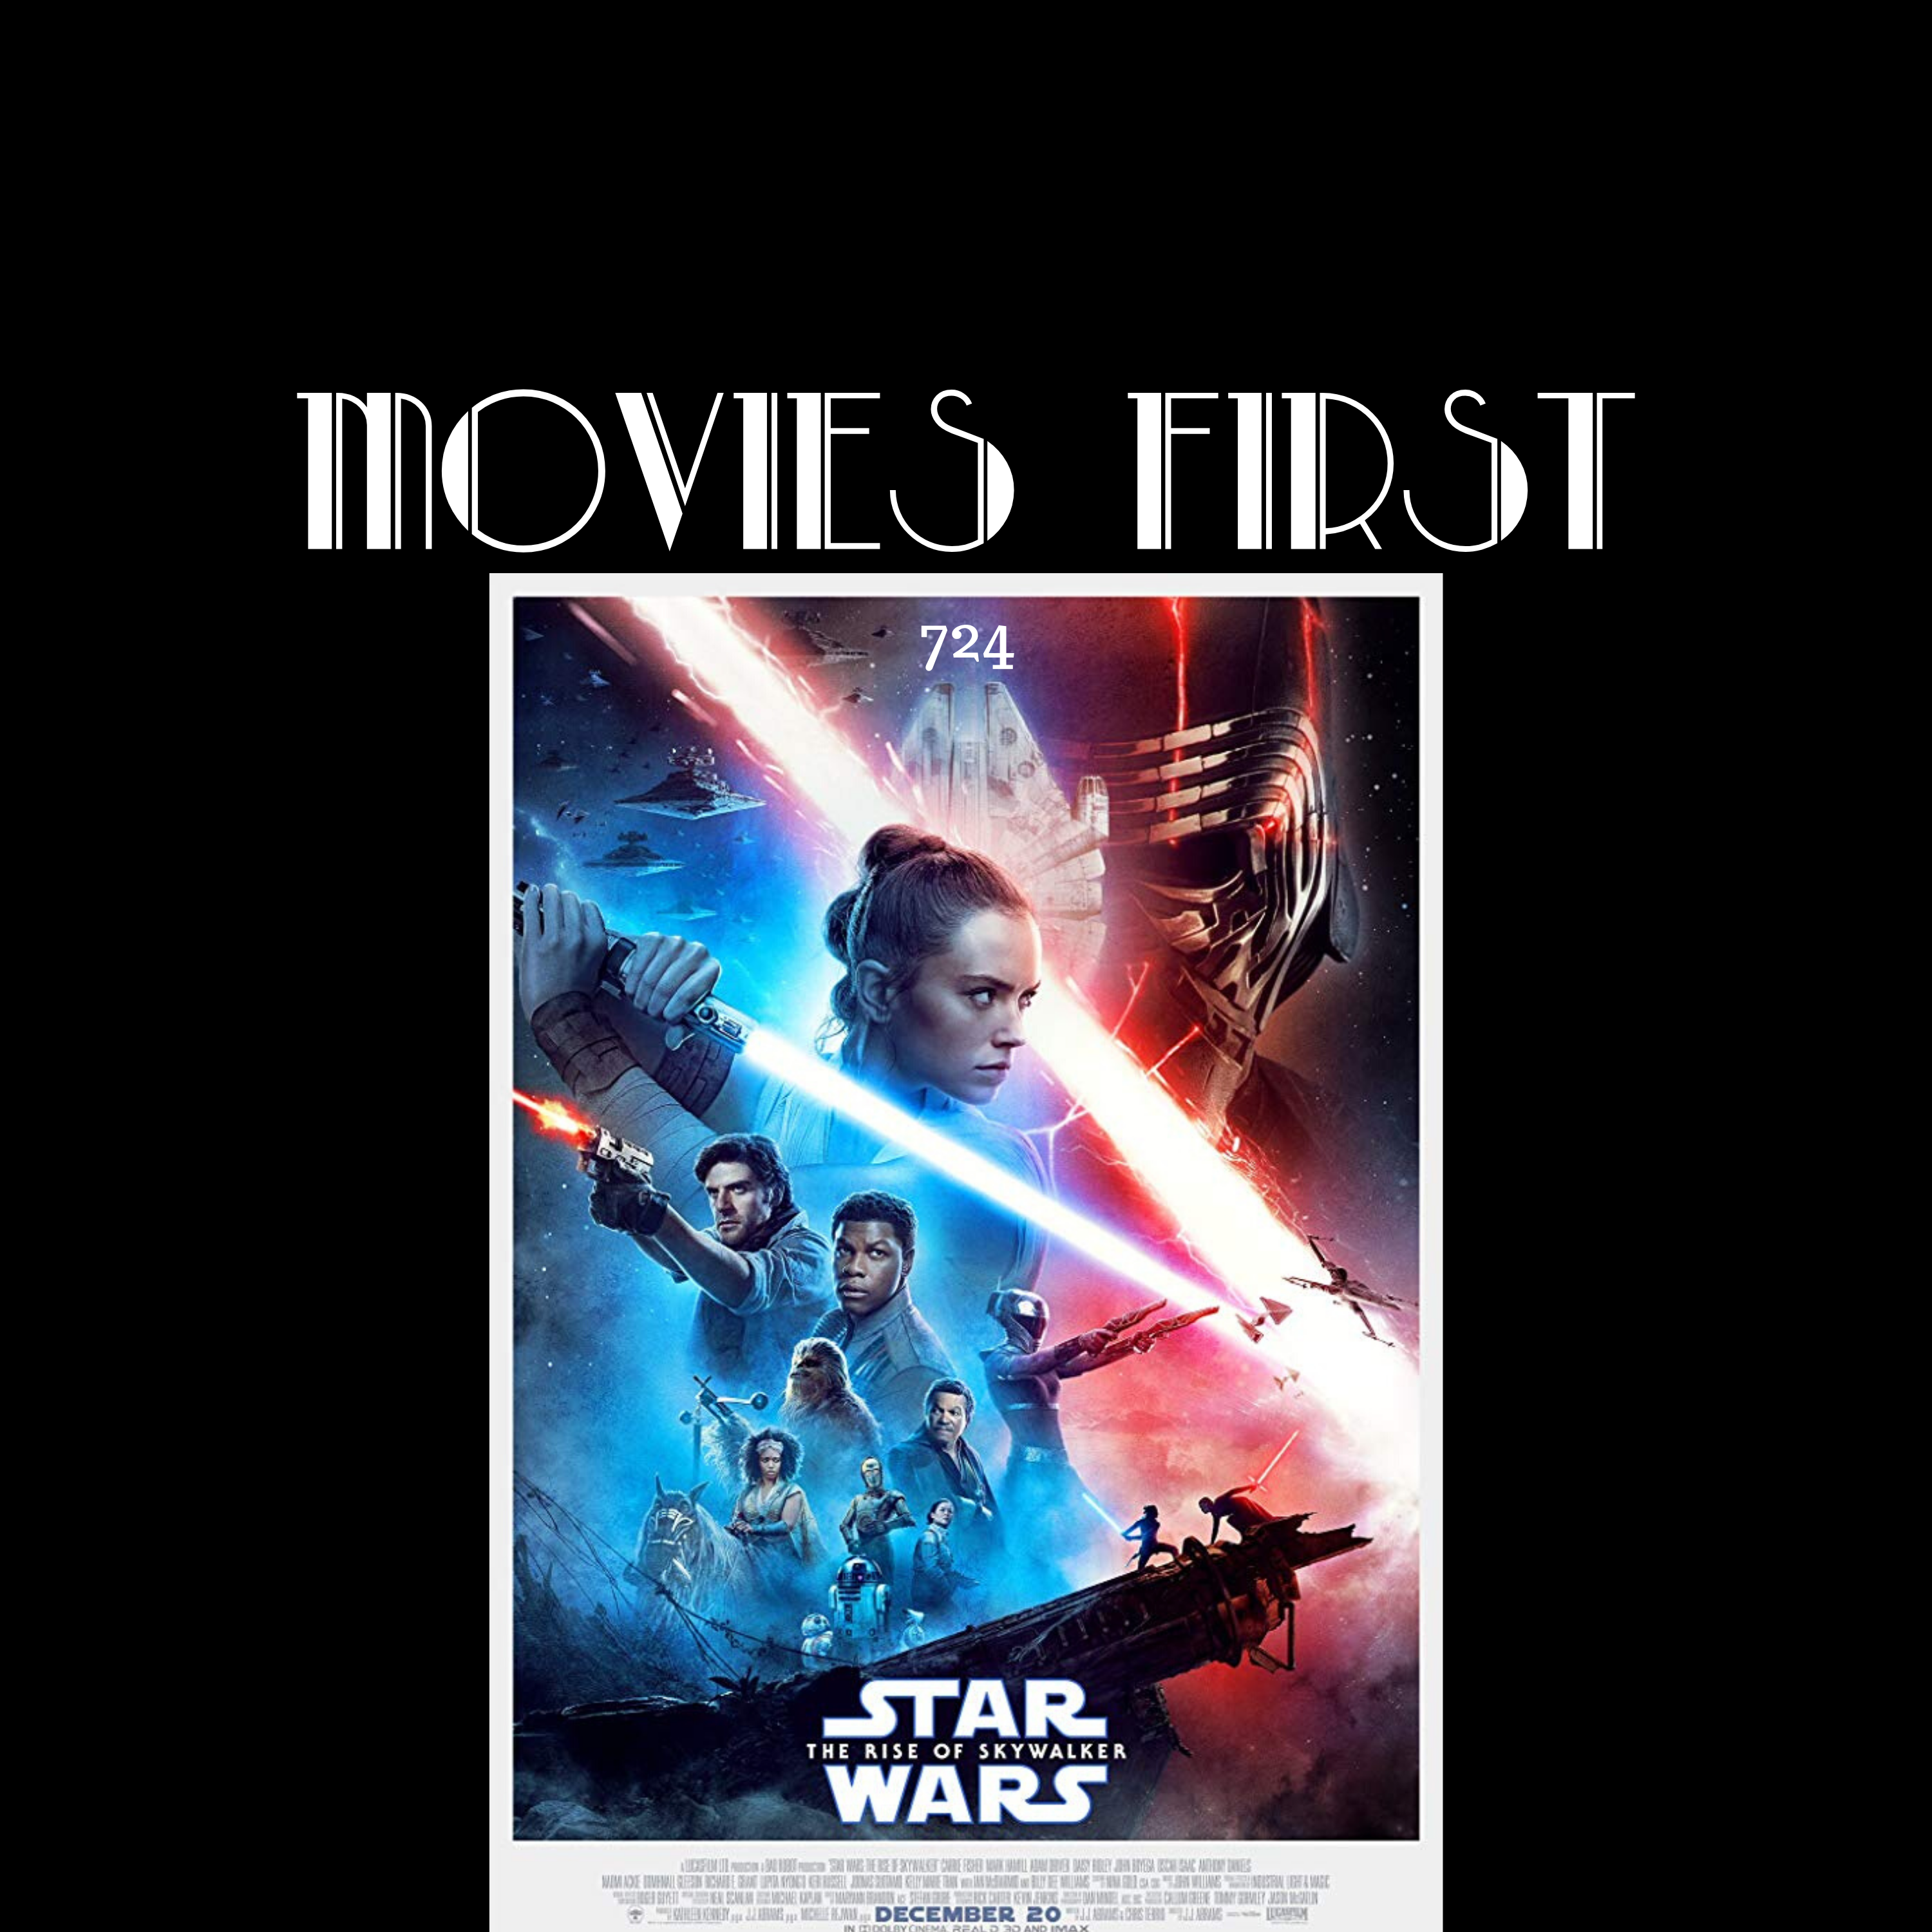 724: Star Wars: The Rise of Skywalker (Action, Adventure, Fantasy) (the @MoviesFirst review)